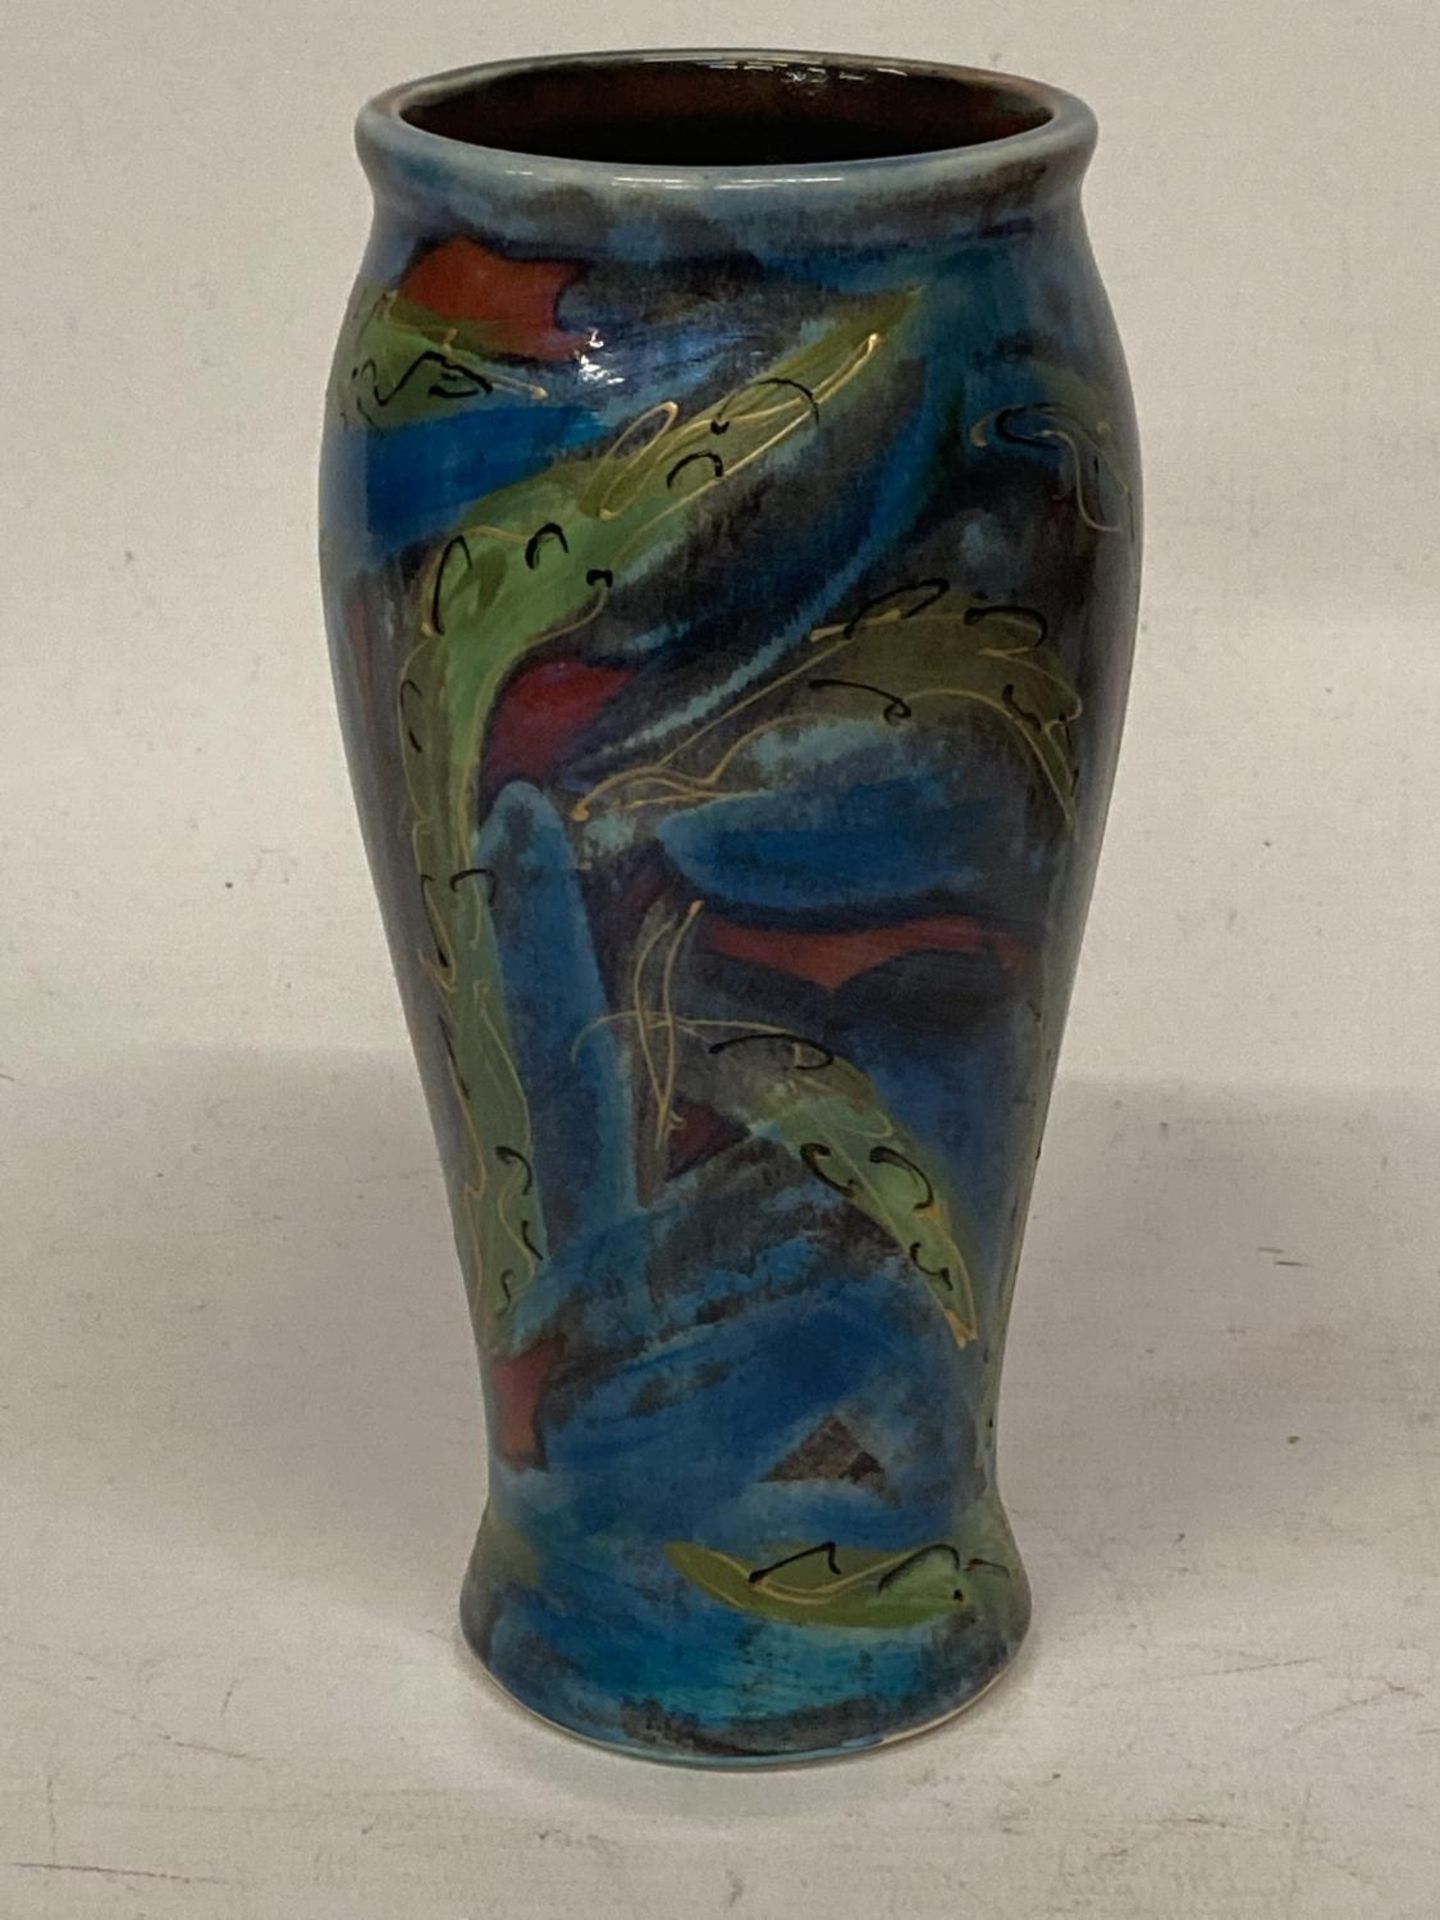 AN ANITA HARRIS SEAHORSE VASE SIGNED IN GOLD - Image 2 of 3